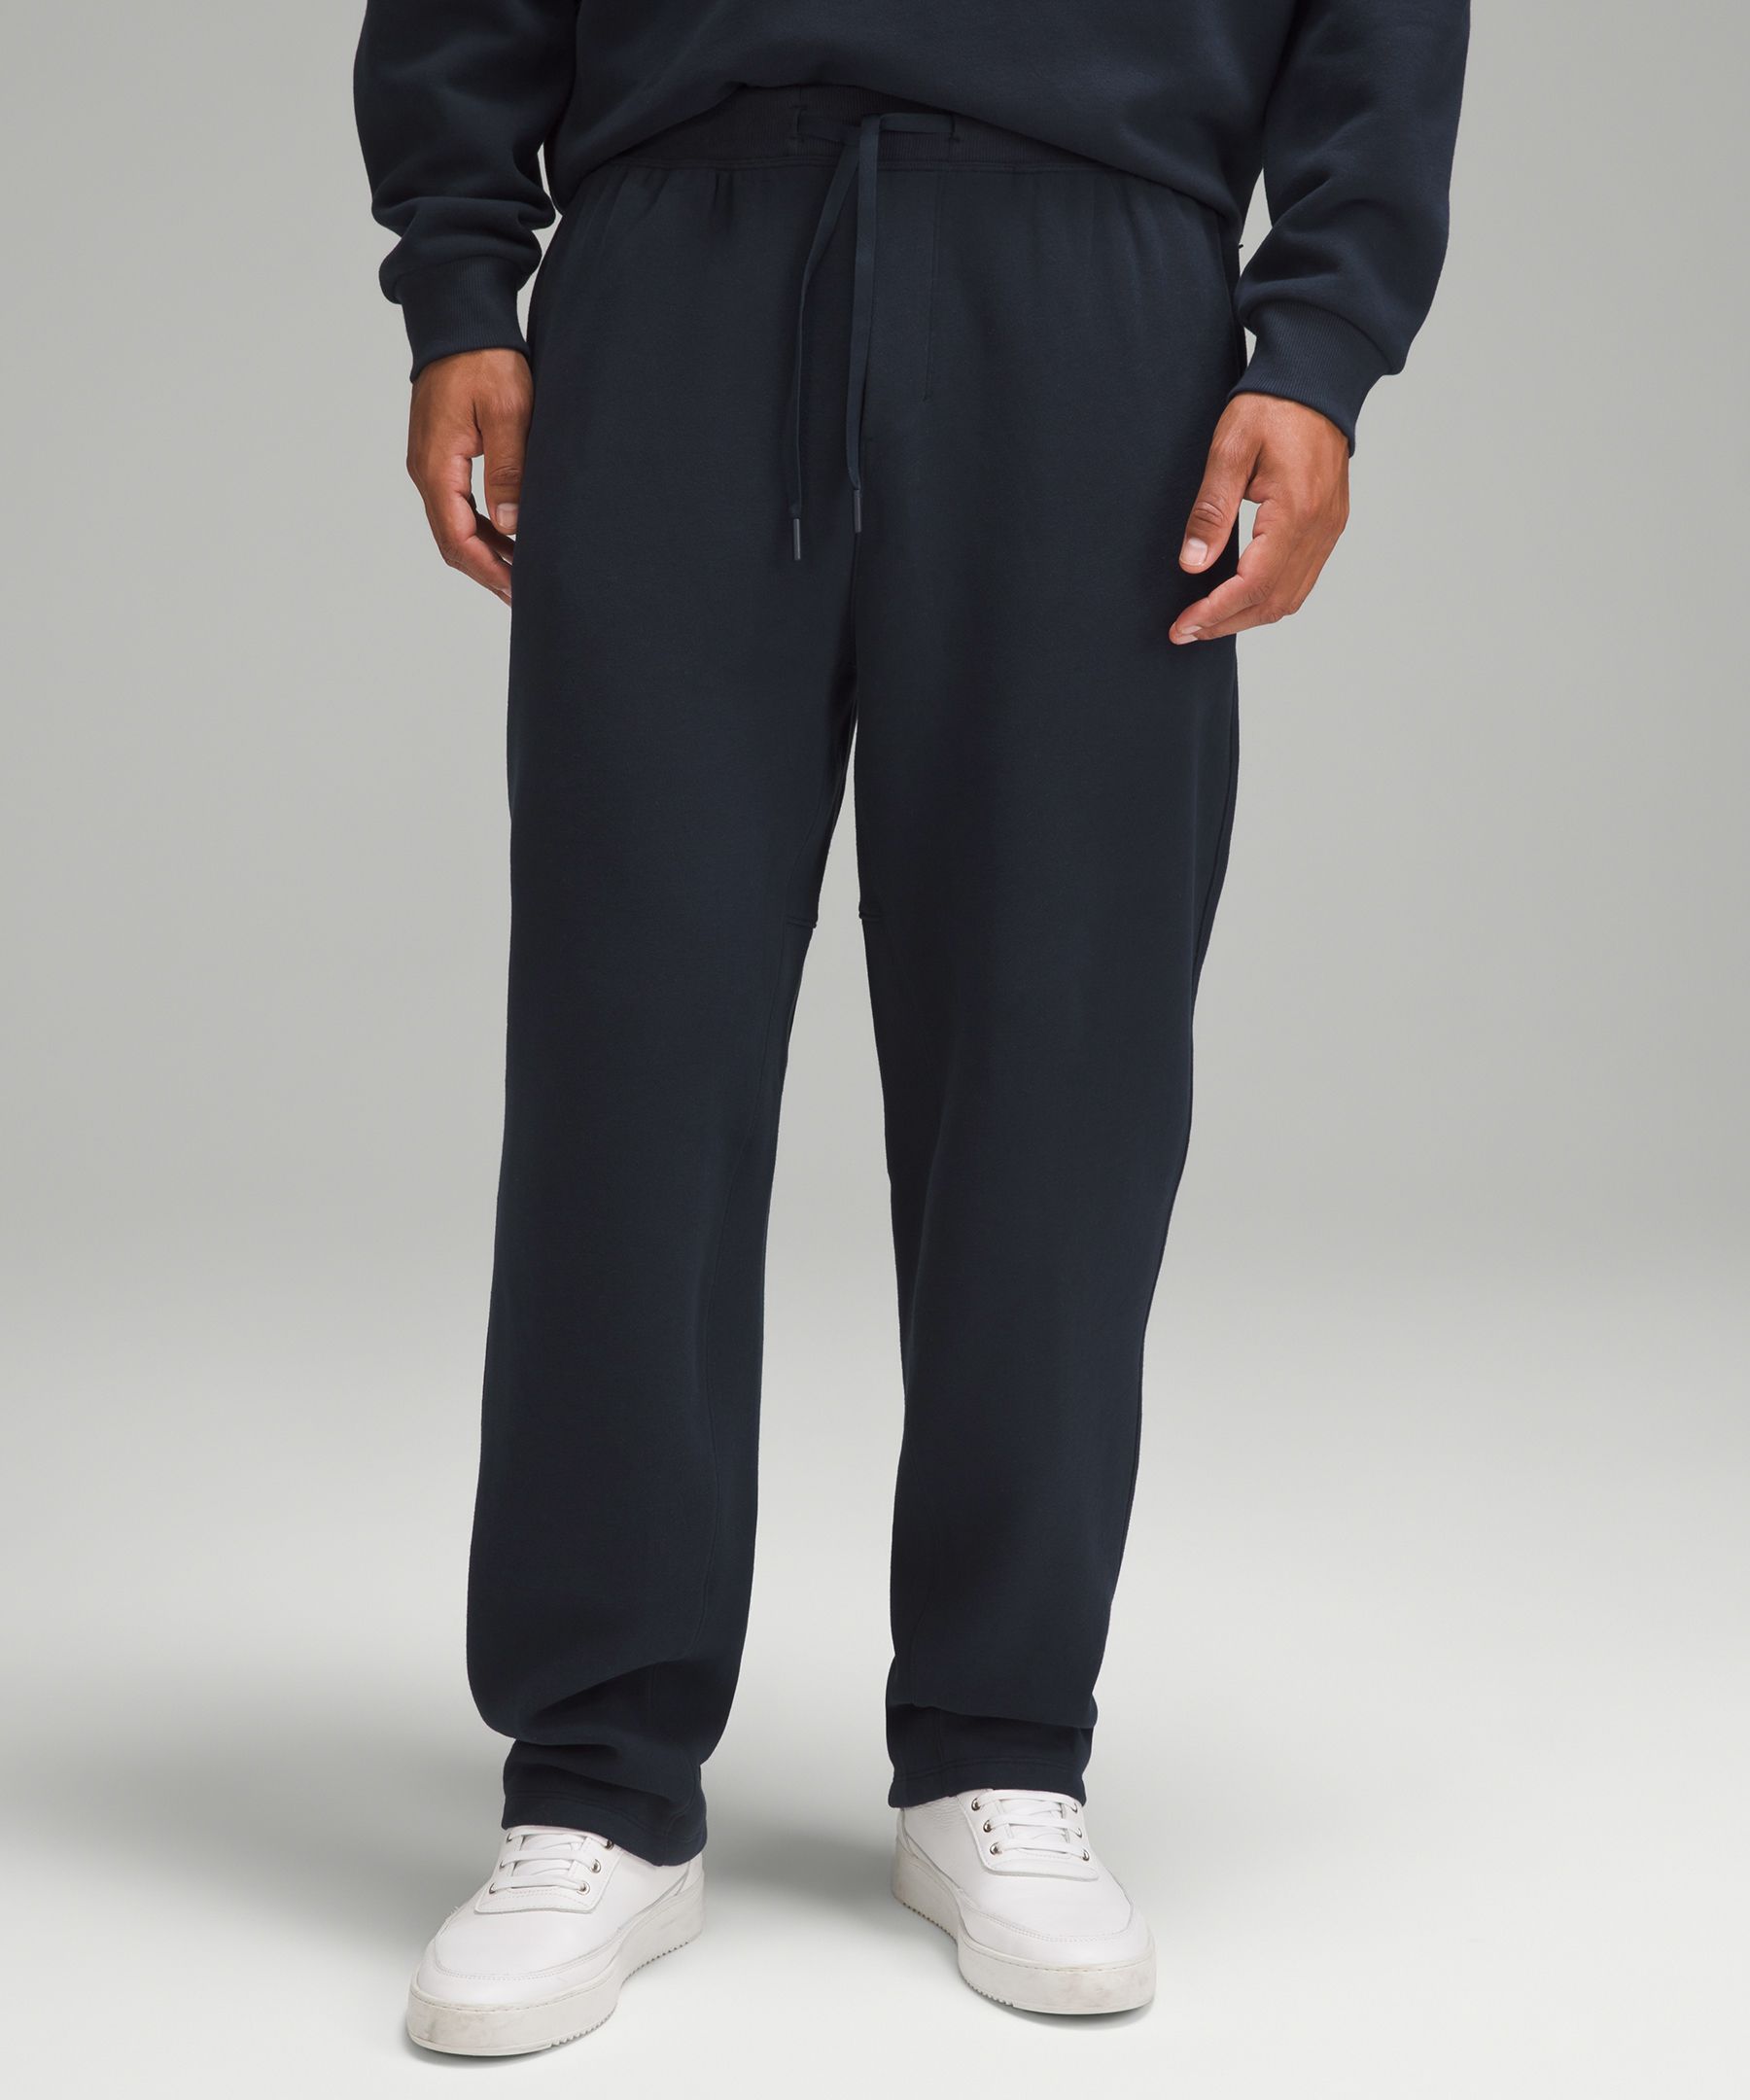 Steady State Pant *Shorter | Men's Joggers